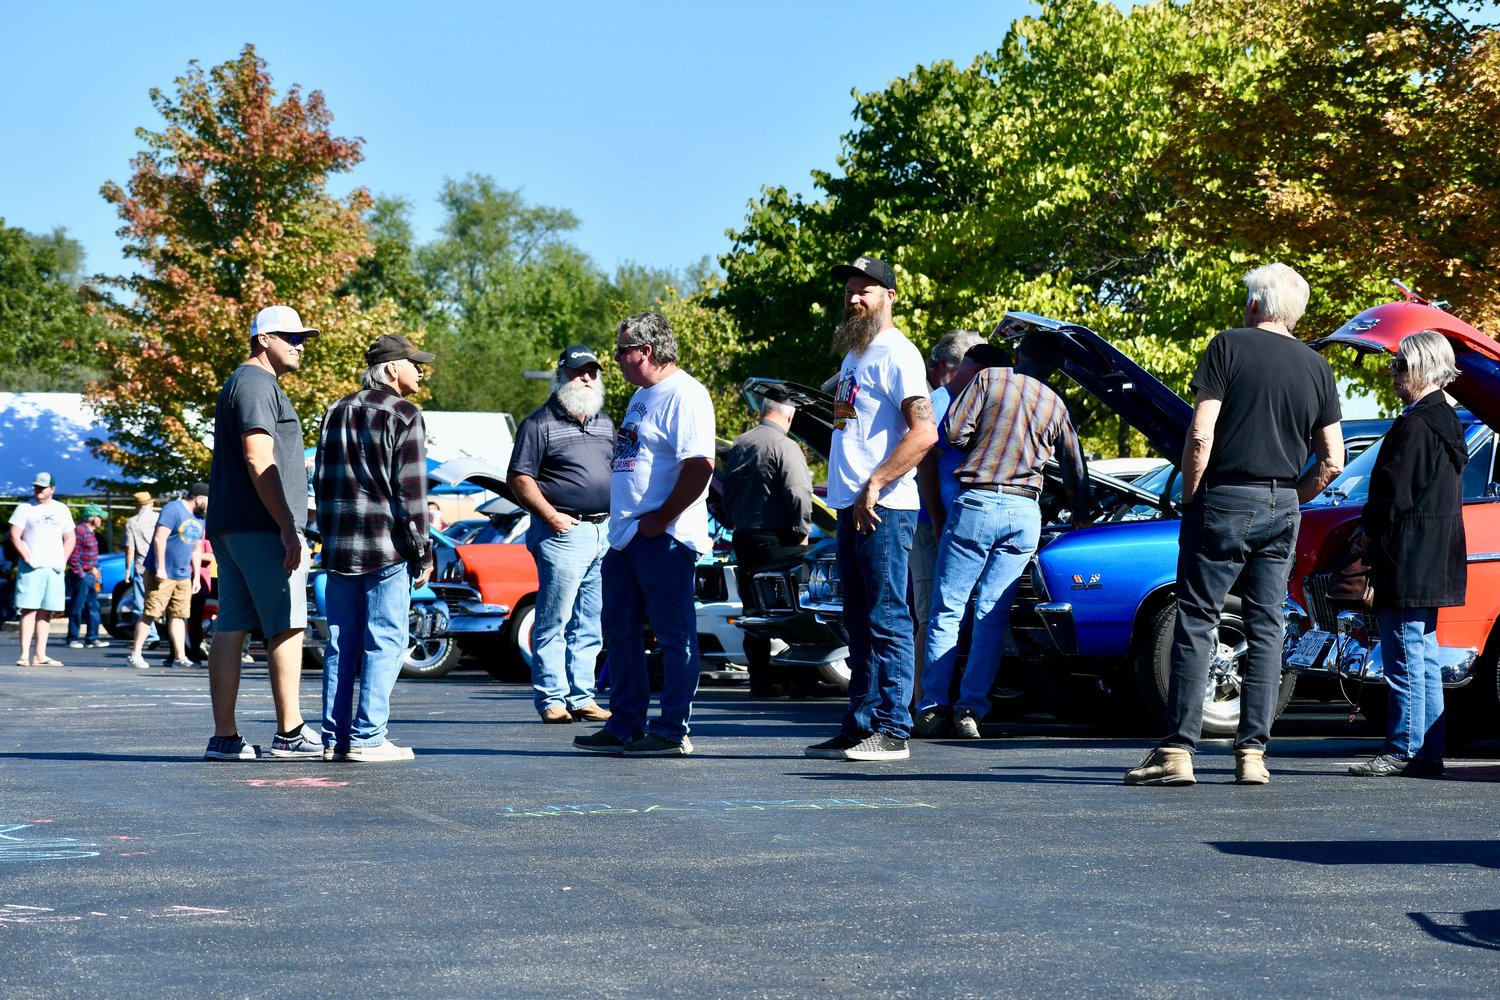 Temperatures were perfect Saturday morning Oct. 1 for the 2022 Car Show at the Central Care Cancer Center. Lots of colorful cars to see and some colors starting to adorn the trees.